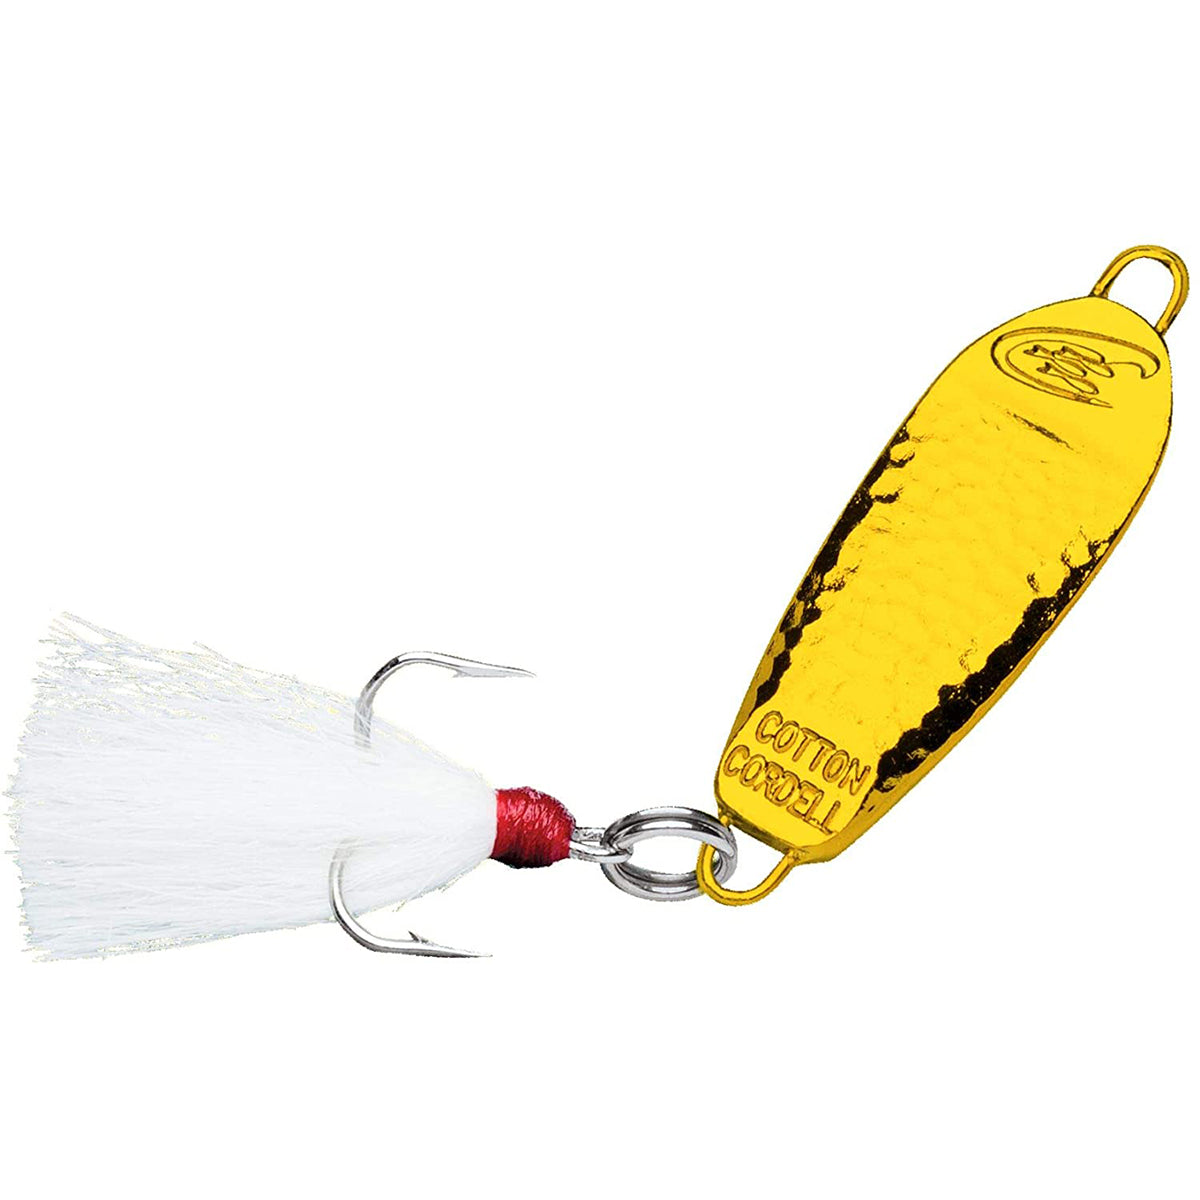 Cotton Cordell Little Mickey Spoon 1/4 oz Fishing Lures Cotton Cordell